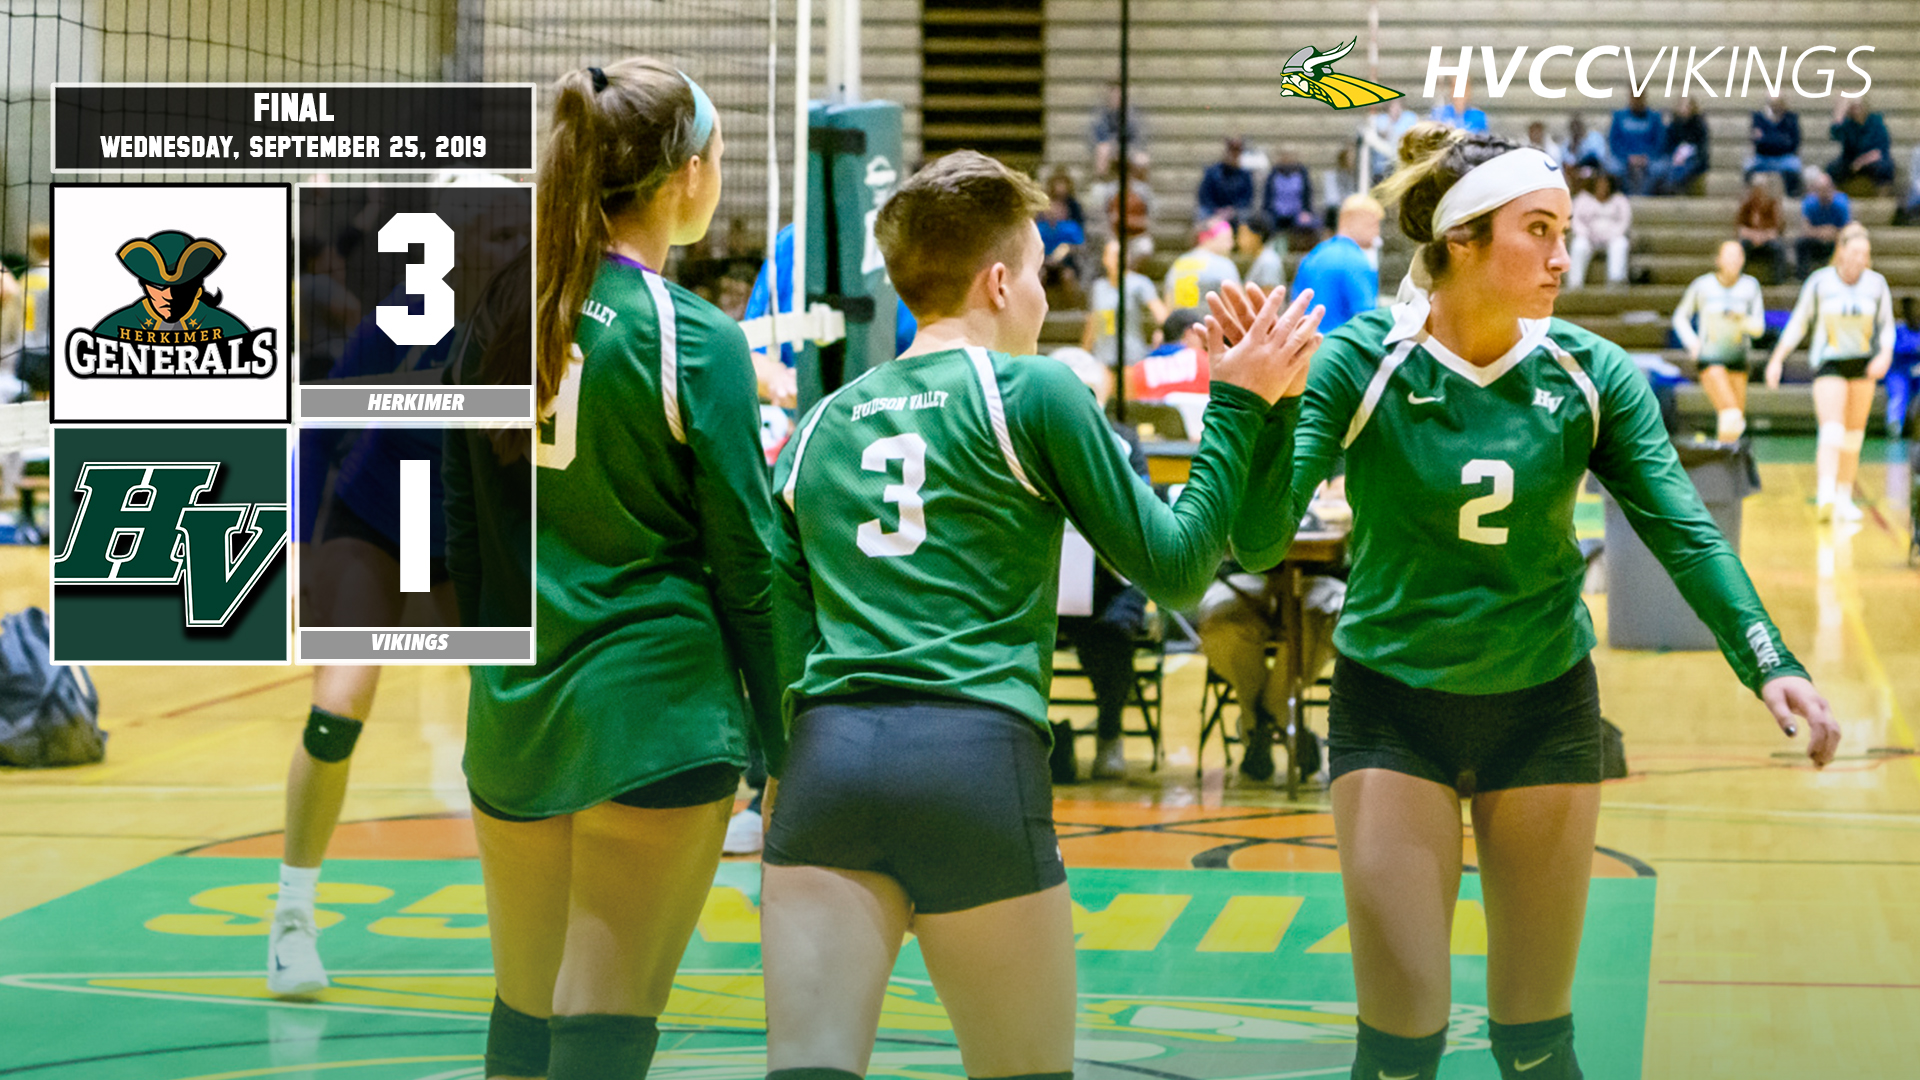 Volleyball defeated by Herkimer 3-1 on 9.25.19